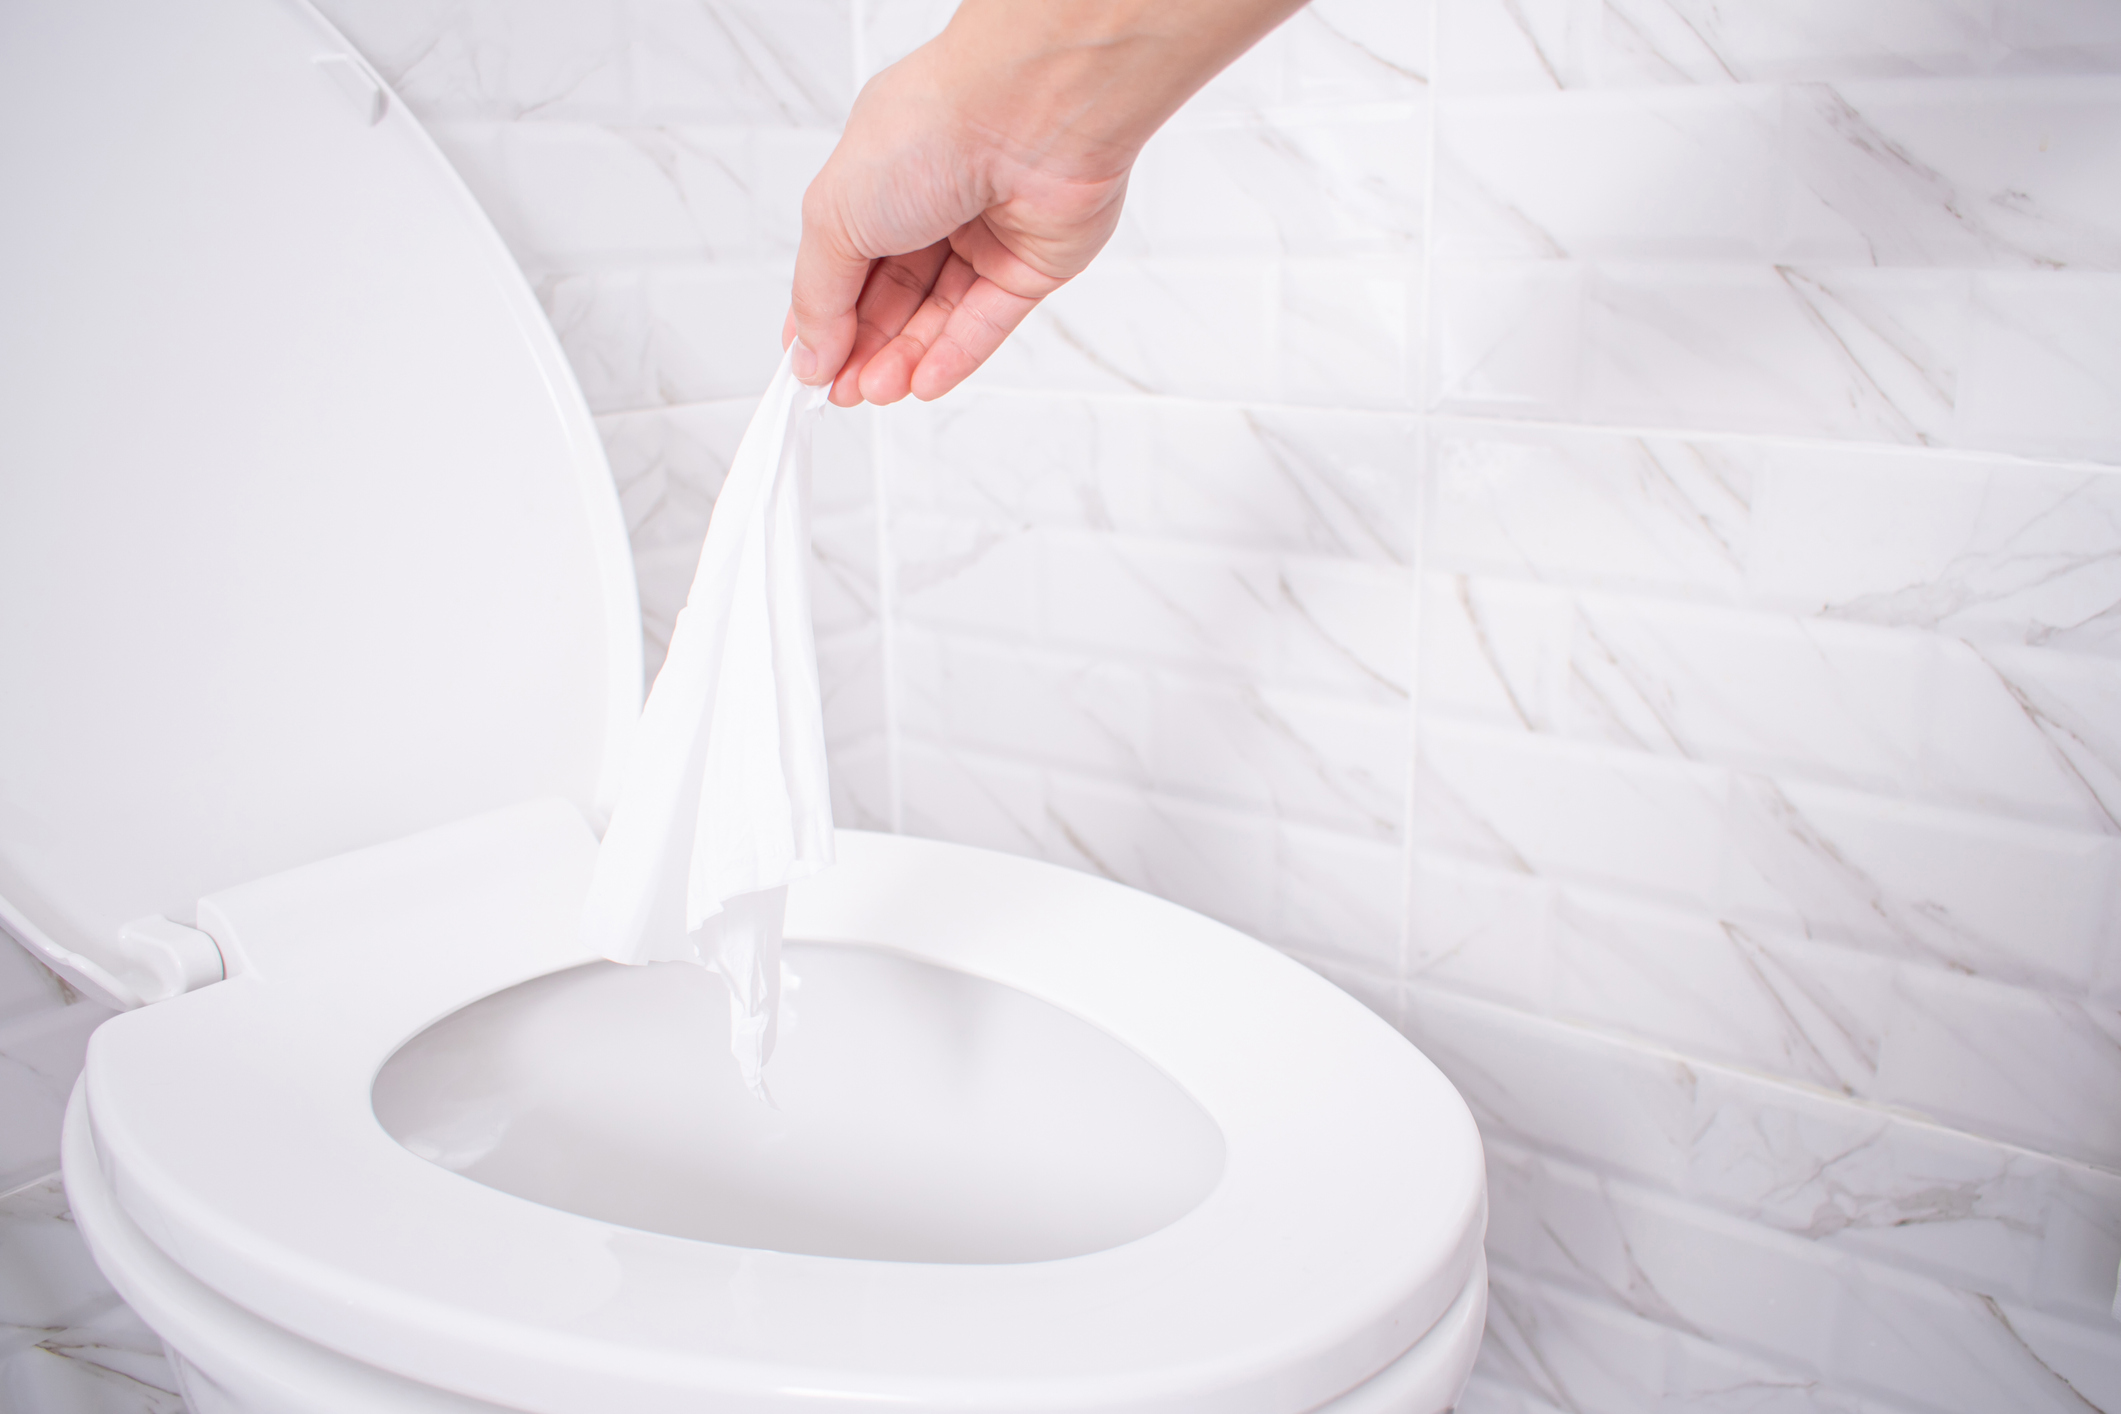 Flushable wipes being flushed down a toilet.